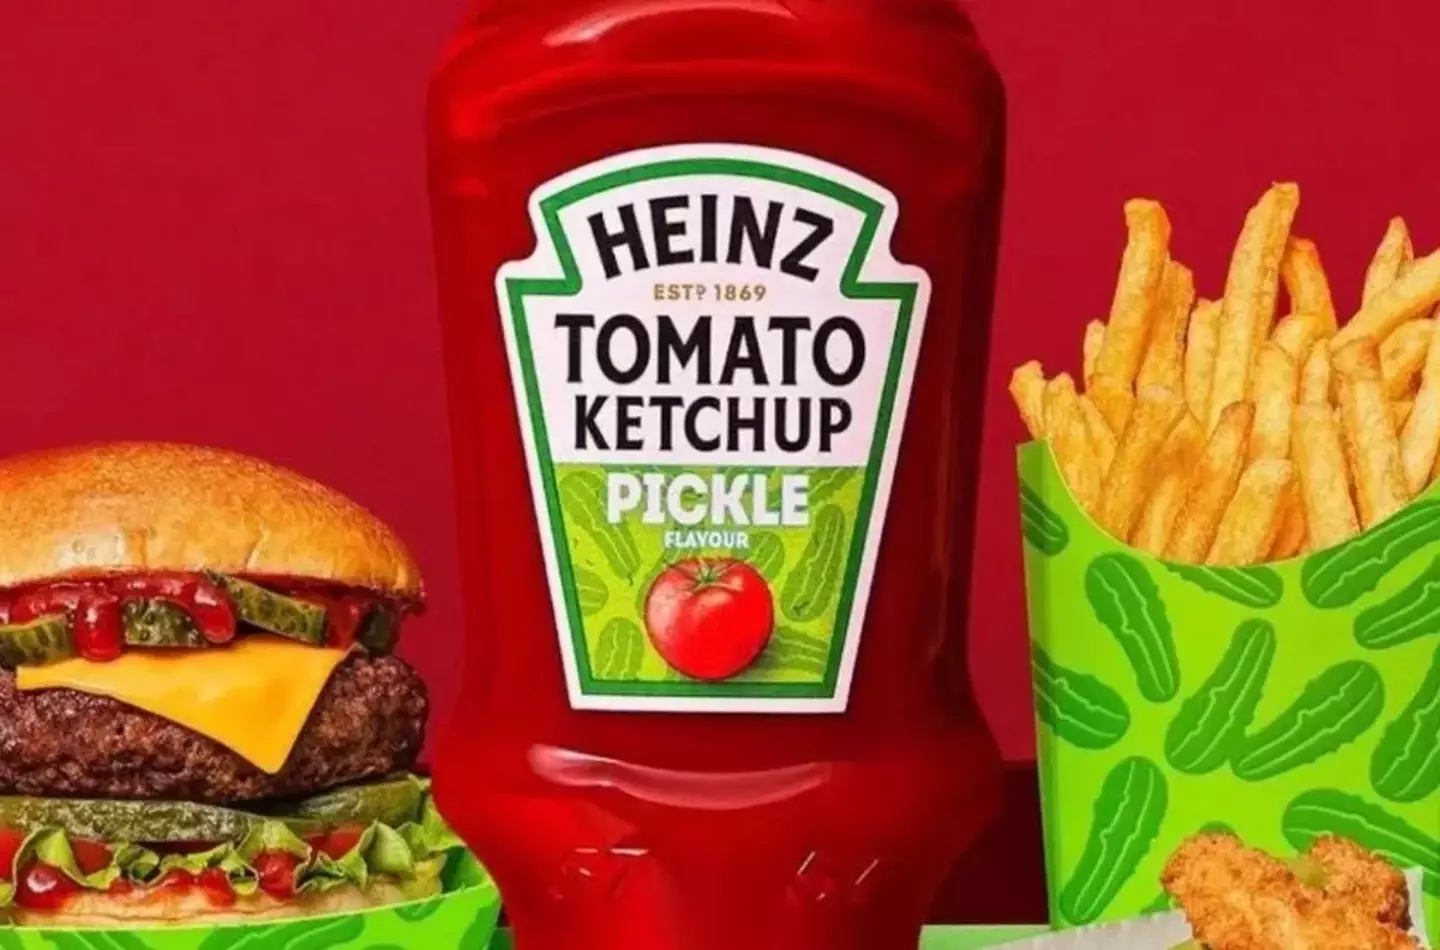 Heinz’s latest tomato ketchup flavour left Brits divided.